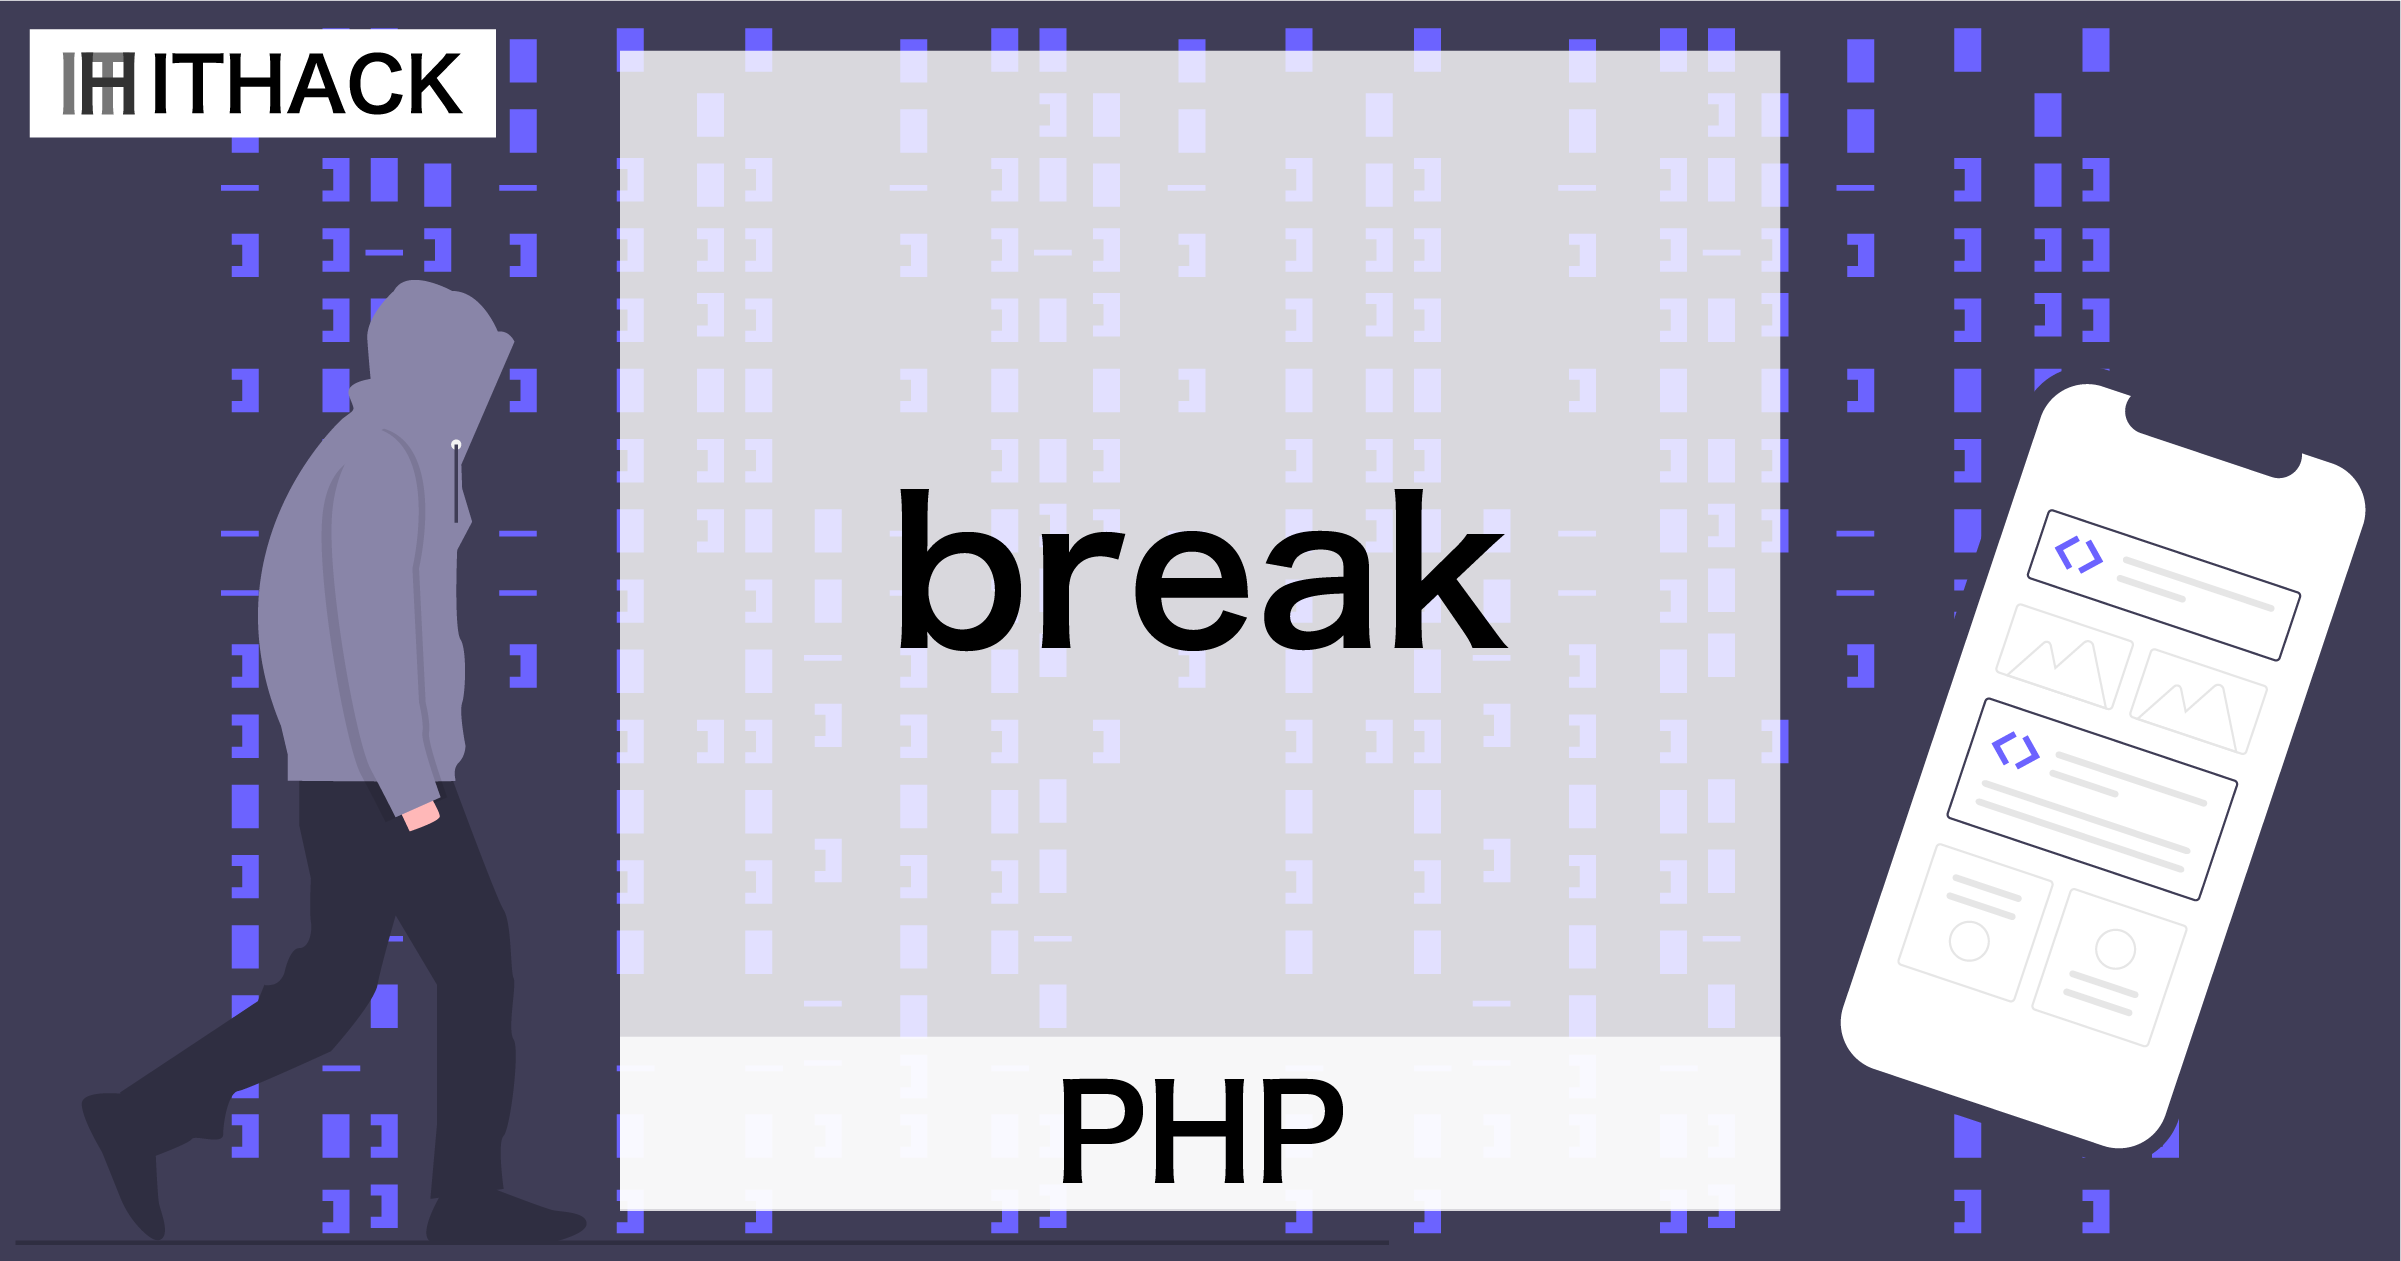 【PHP】break文 - 反復処理・条件分岐処理の強制終了（for/foreach/while/do-while/switch）